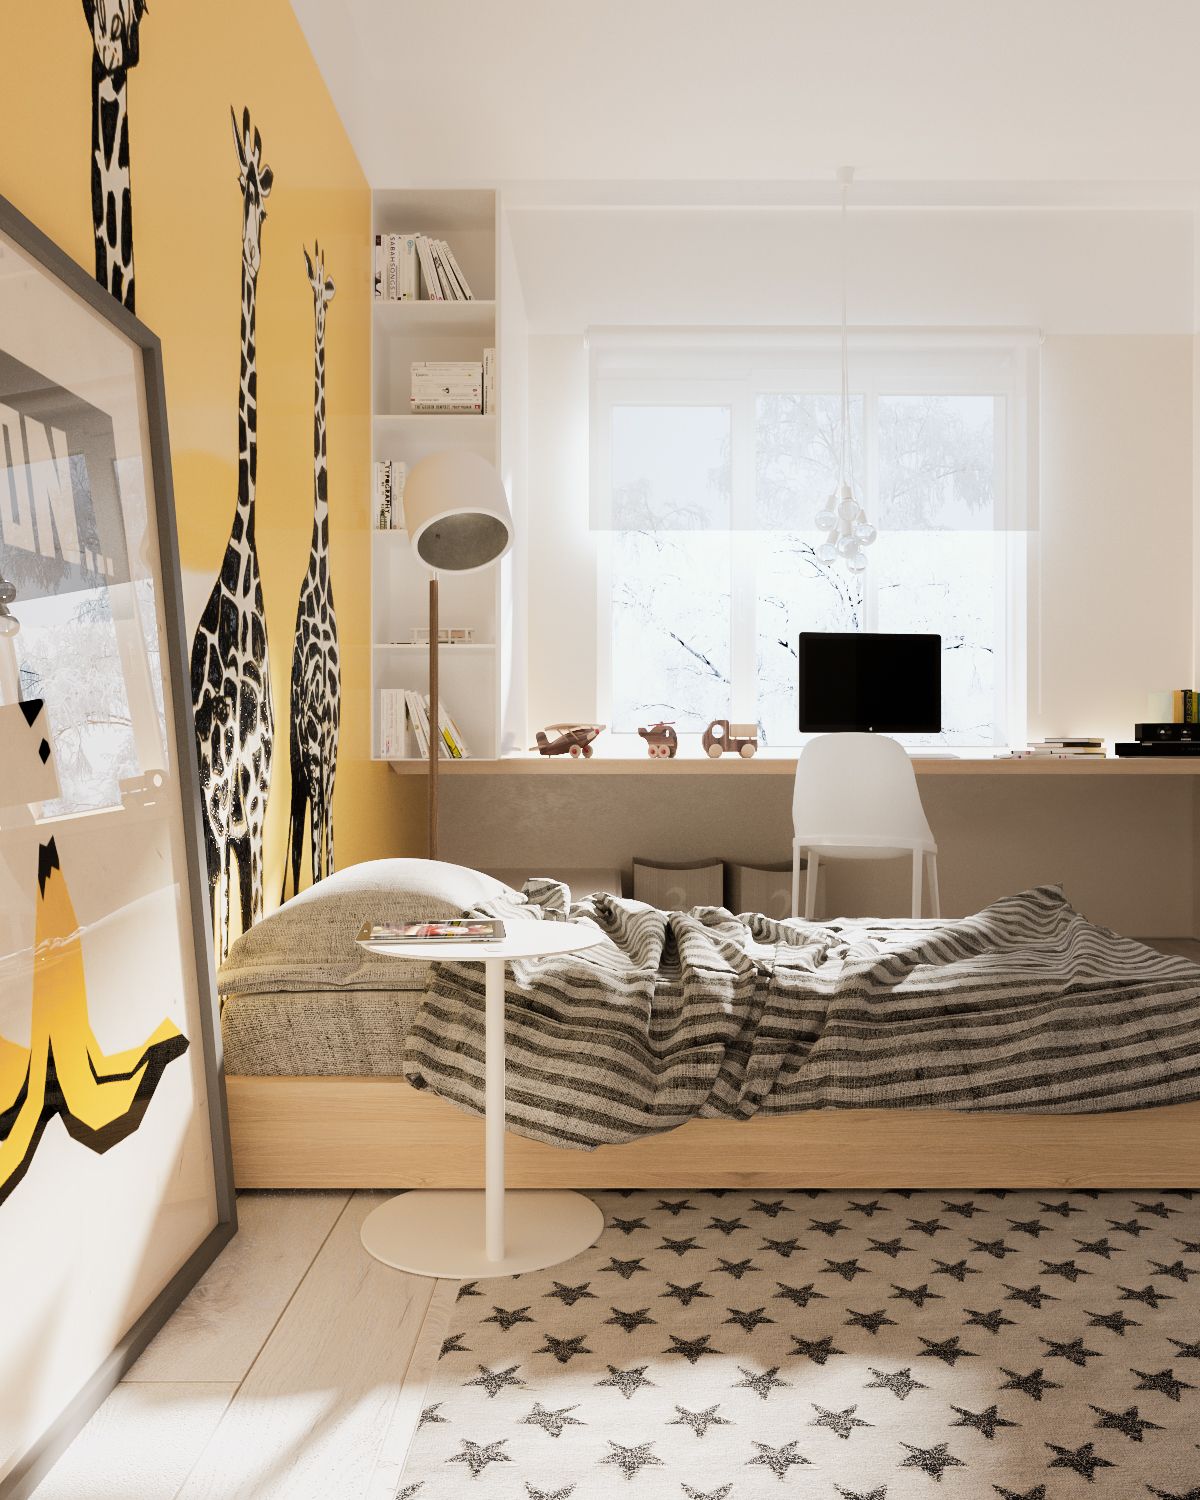 Modern furnishing style for children's rooms "width =" 1200 "height =" 1500 "srcset =" https://mileray.com/wp-content/uploads/2020/05/1588510804_665_2-Modern-Interior-Style-For-Stylish-Bedroom-Design.jpg 1200w, https : //mileray.com/wp-content/uploads/2016/06/zoo-themed-kids-bedroom-1-240x300.jpg 240w, https://mileray.com/wp-content/uploads/2016/ 06 / Zoo-themed-children's room-1-768x960.jpg 768w, https://mileray.com/wp-content/uploads/2016/06/zoo-themed-kids-bedroom-1-819x1024.jpg 819w, https: // mileray.com/wp-content/uploads/2016/06/zoo-themed-kids-bedroom-1-696x870.jpg 696w, https://mileray.com/wp-content/uploads/2016/06 / zoo-themed -kids-bedroom-1-1068x1335.jpg 1068w, https://mileray.com/wp-content/uploads/2016/06/zoo-themed-kids-bedroom-1-336x420.jpg 336w "Sizes =" (maximum Width: 1200px) 100vw, 1200px